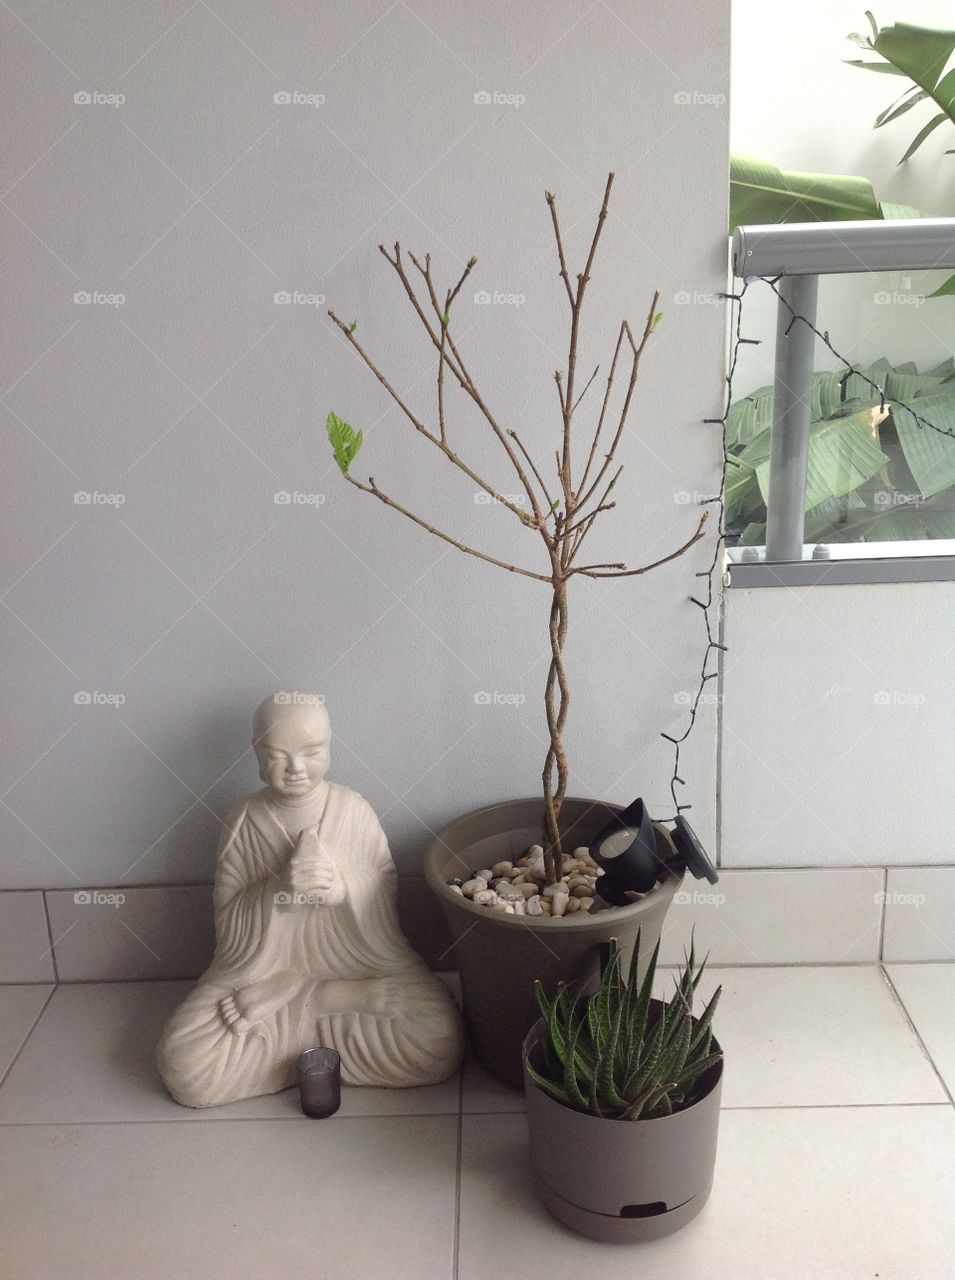 Buddha with a tree hanging on in hope